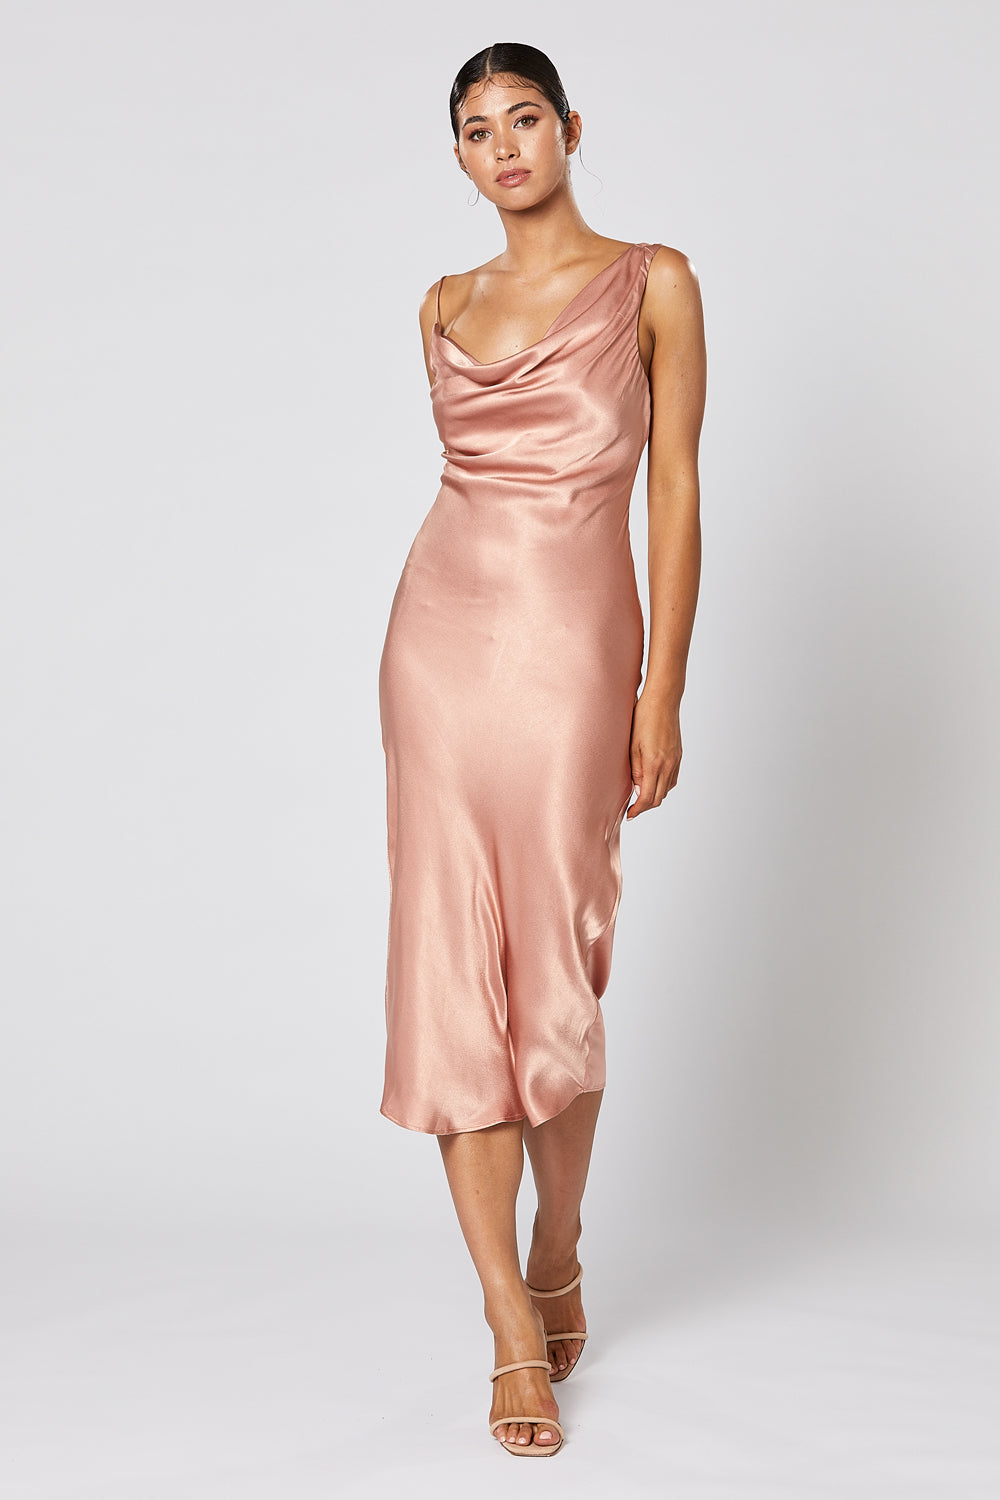 Simple Straps Dusty Pink Long Cheap Bridesmaid Dresses Online,MBD112 –  Musebridals